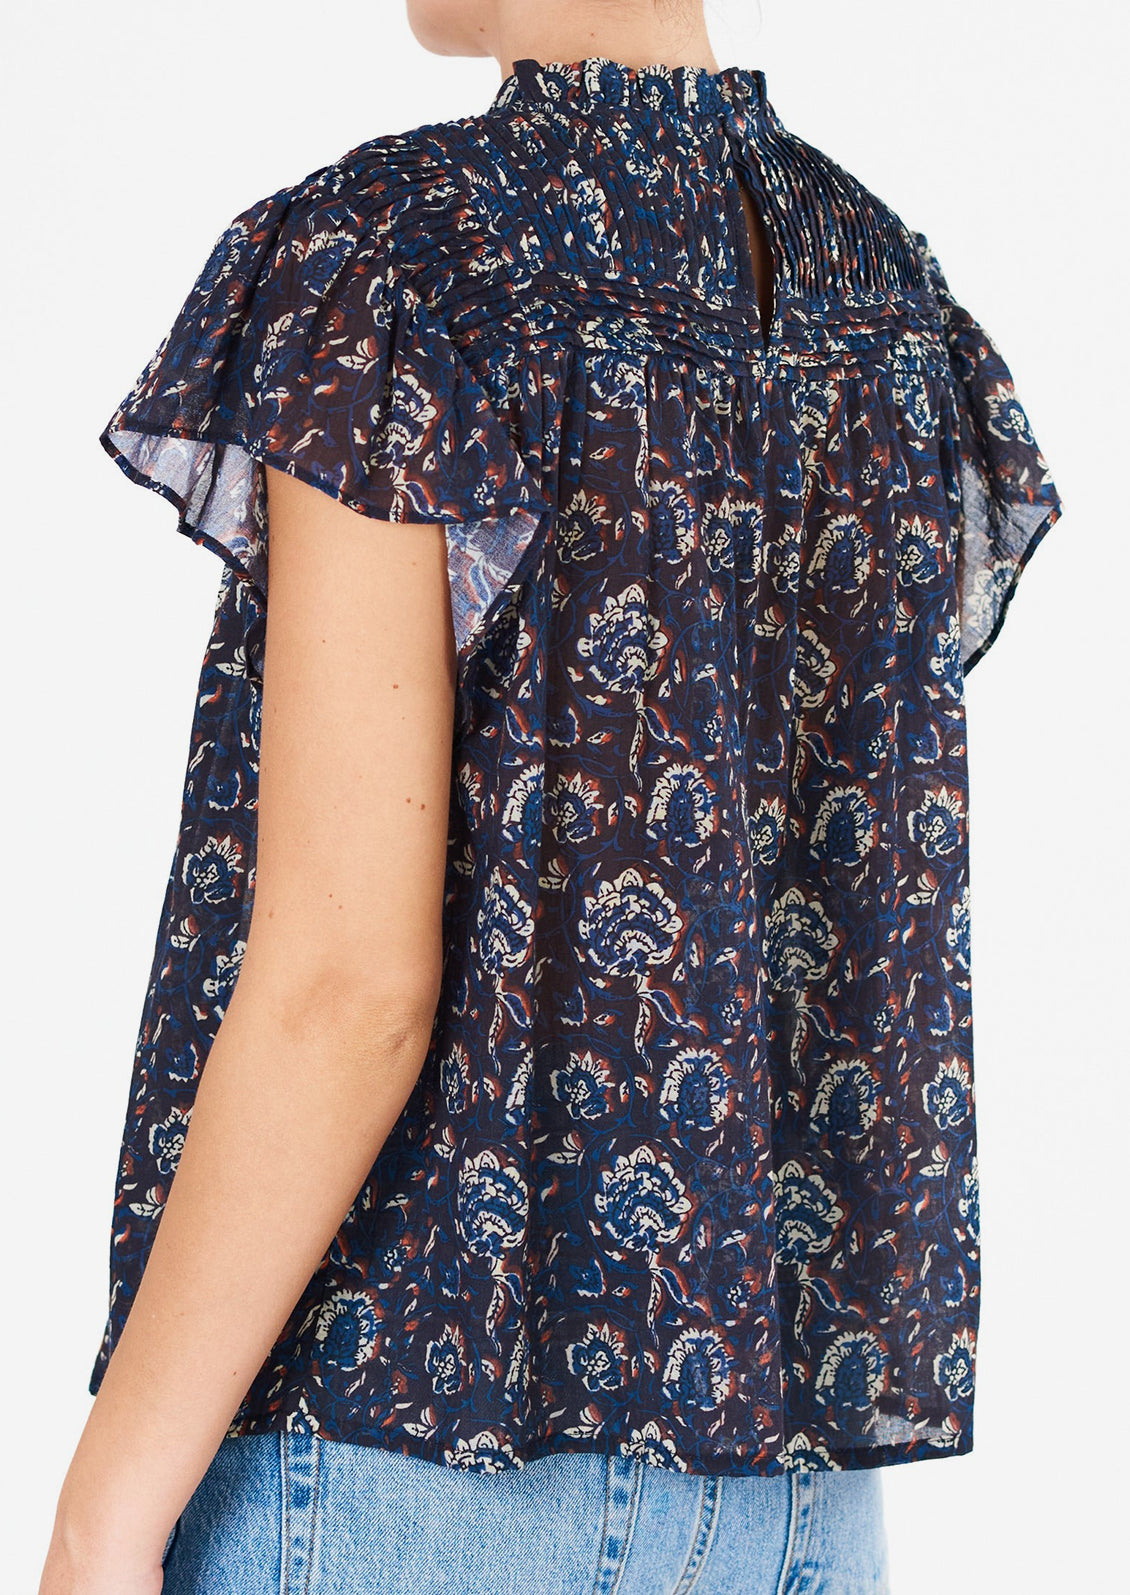 A woman wearing a blue, white and rust floral printed flutter sleeve top.